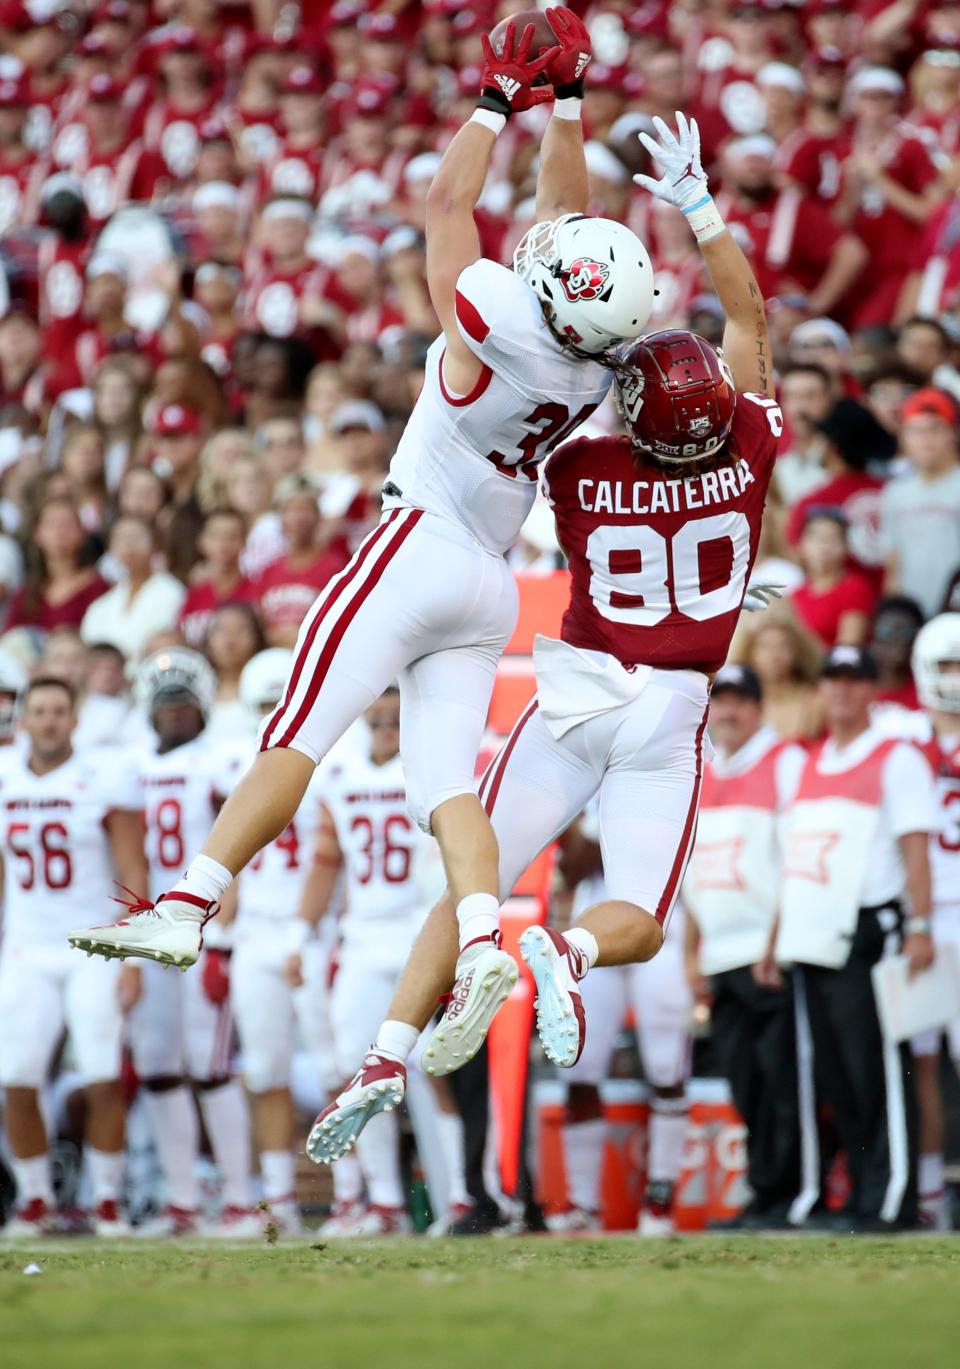 South Dakota linebacker Jack Cochrane (39) breaks up a pass intended for Oklahoma tight end Grant Calcaterra (80) in this file photo.